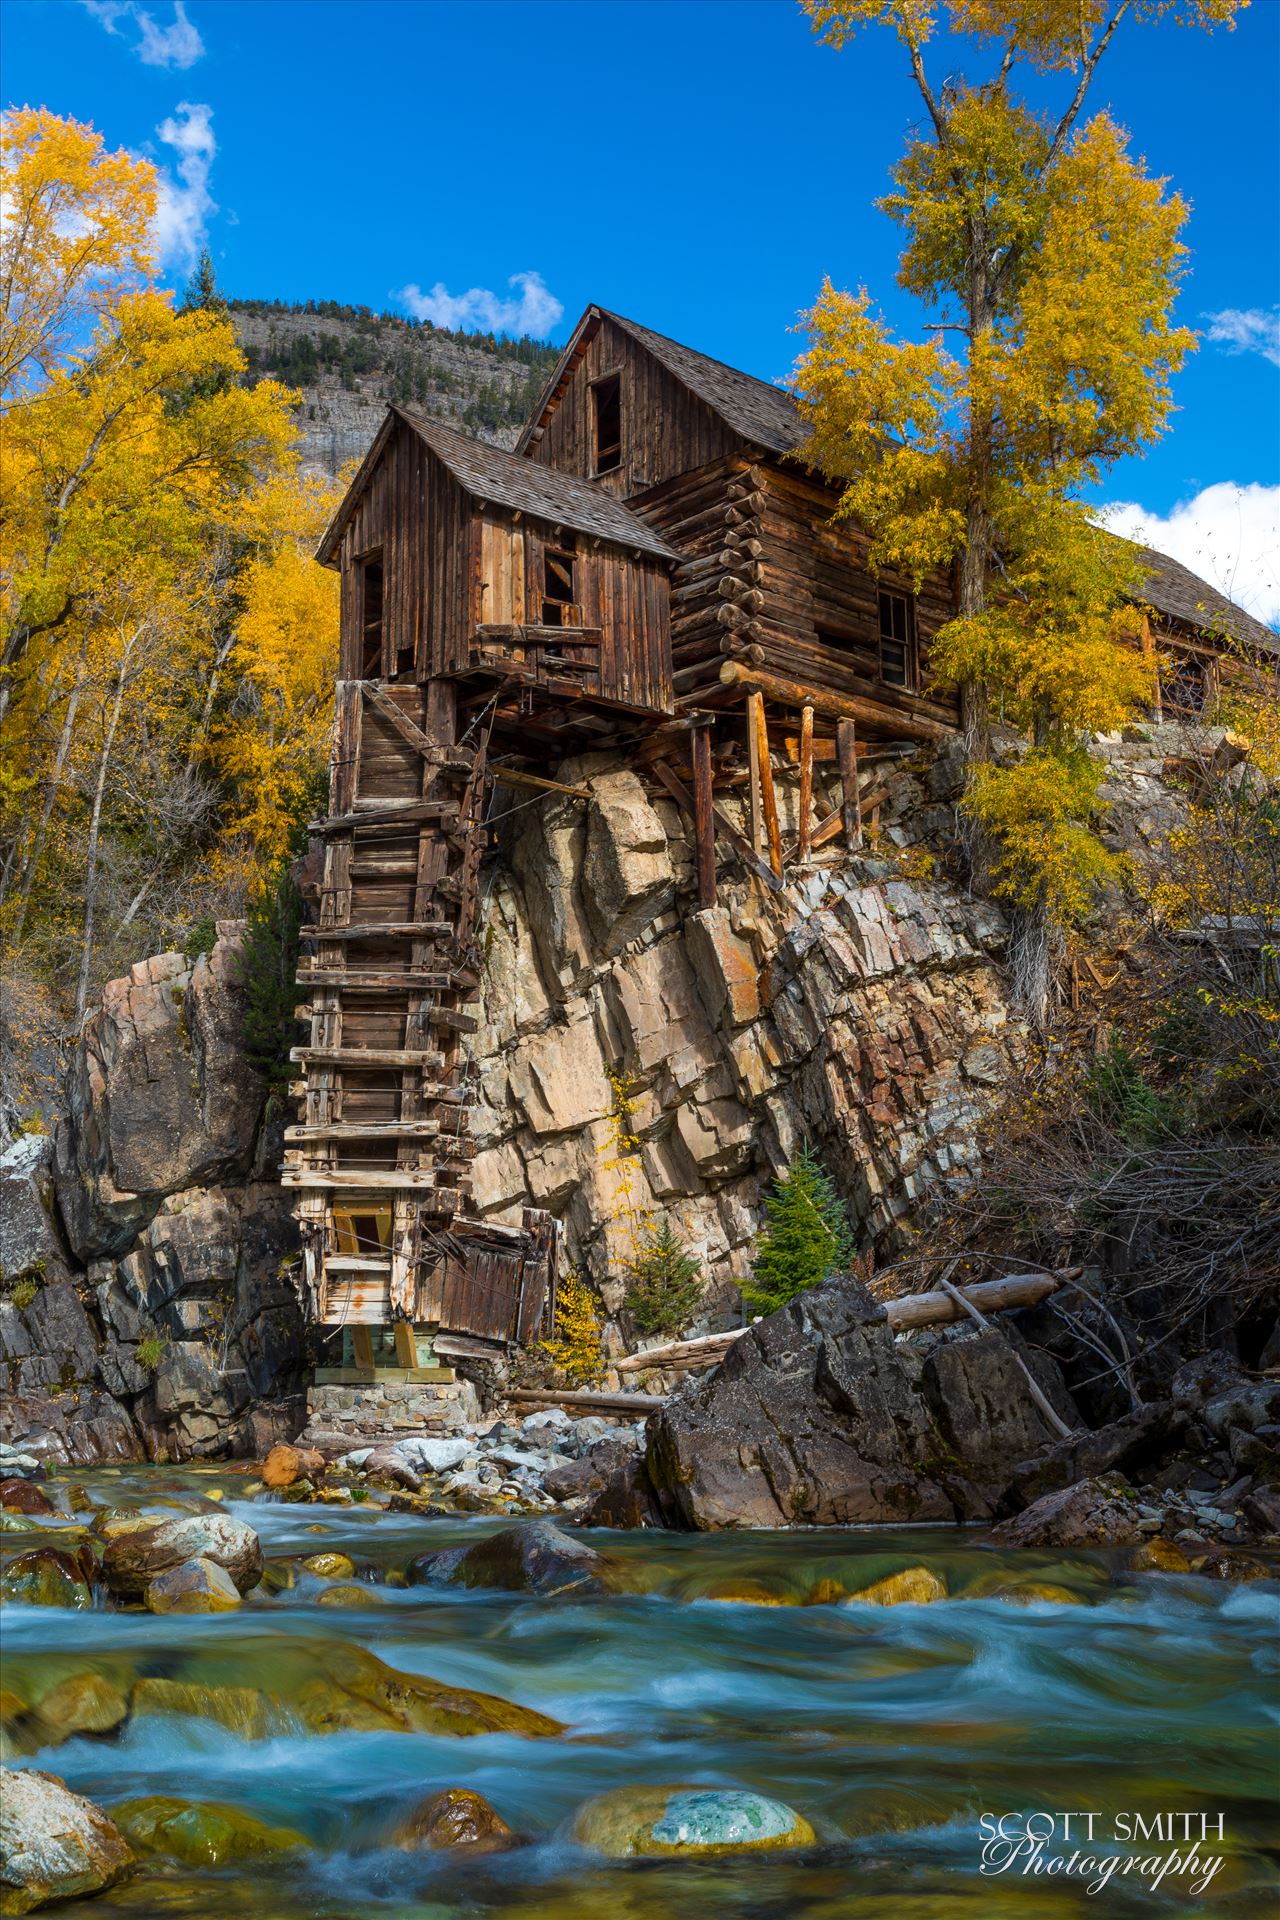 Crystal Mill No 4 - The Crystal Mill, or the Old Mill is an 1892 wooden powerhouse located on an outcrop above the Crystal River in Crystal, Colorado by Scott Smith Photos